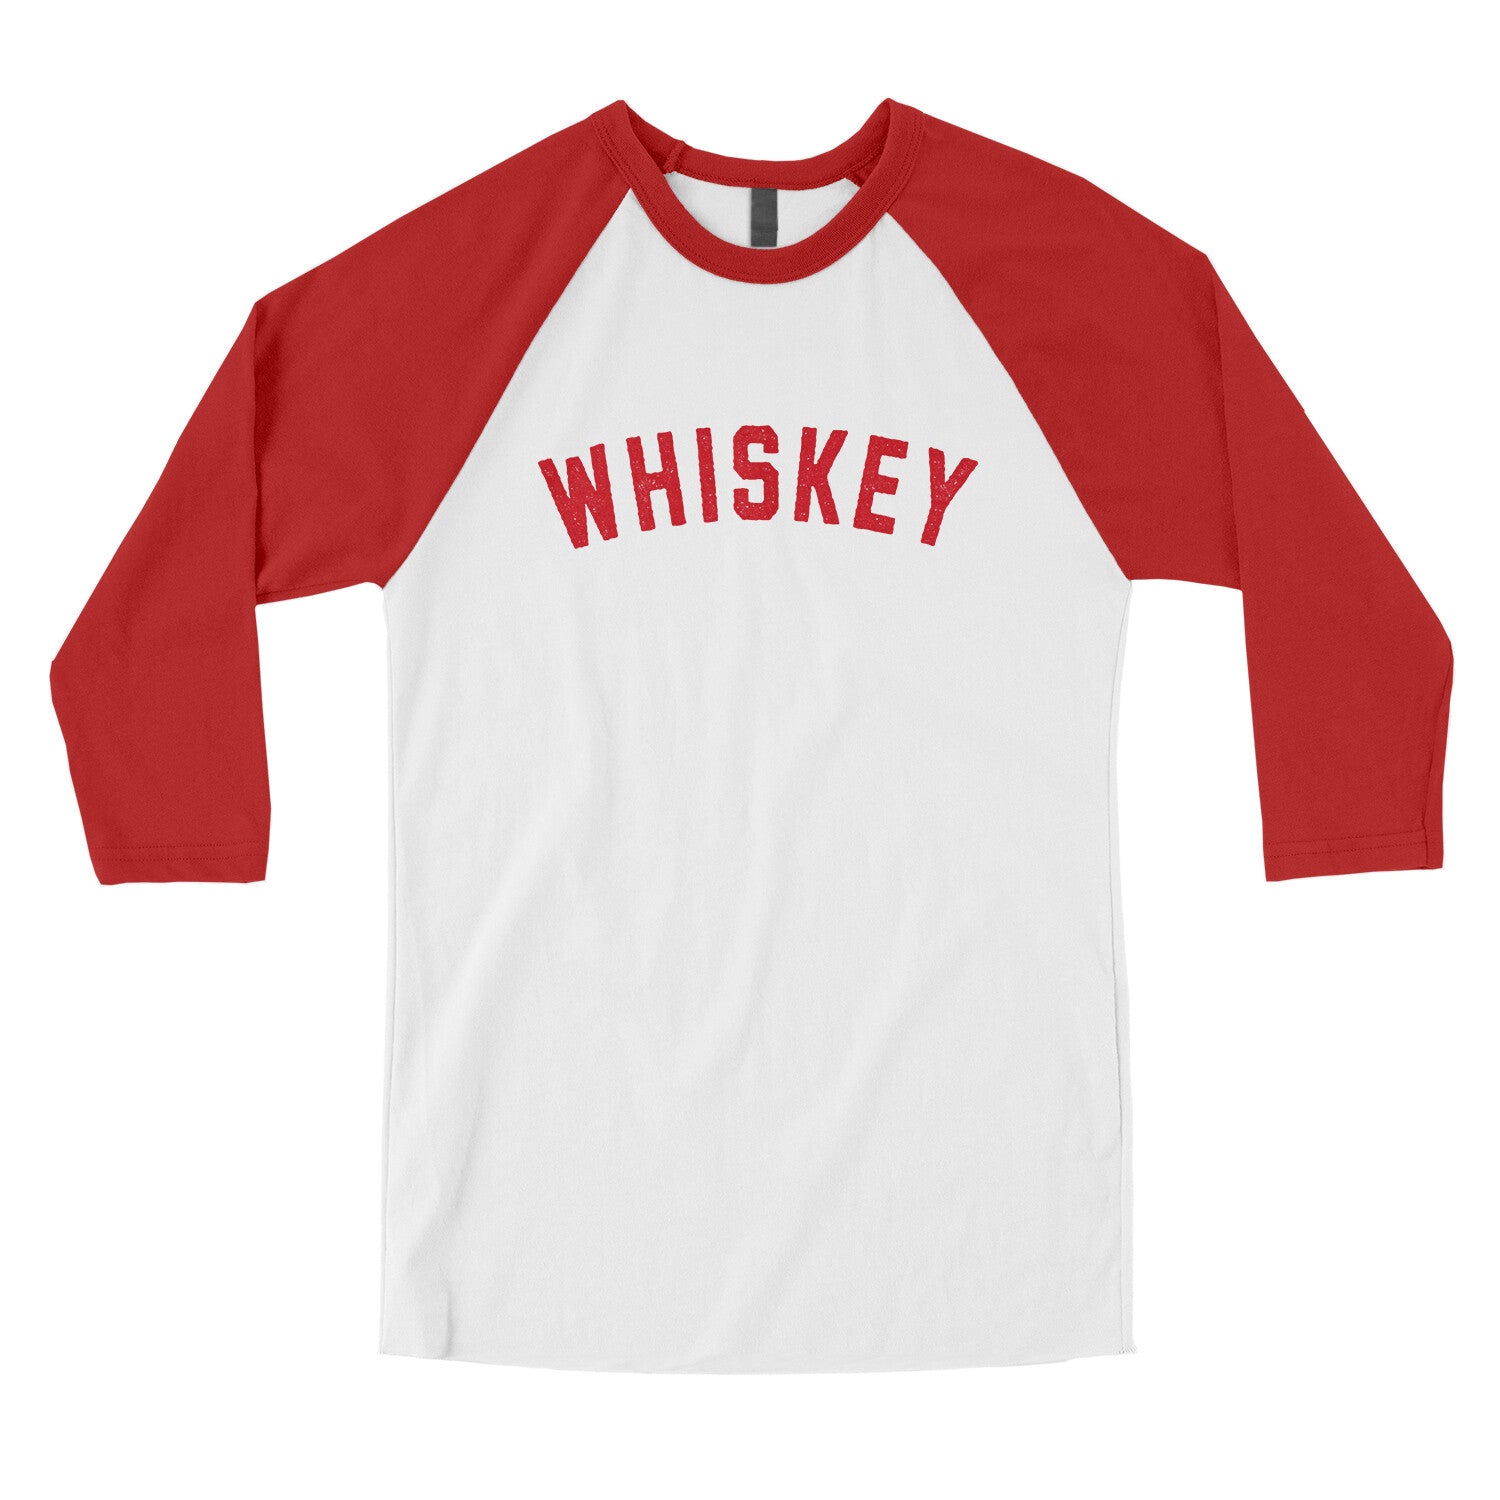 Whiskey in White with Red Color